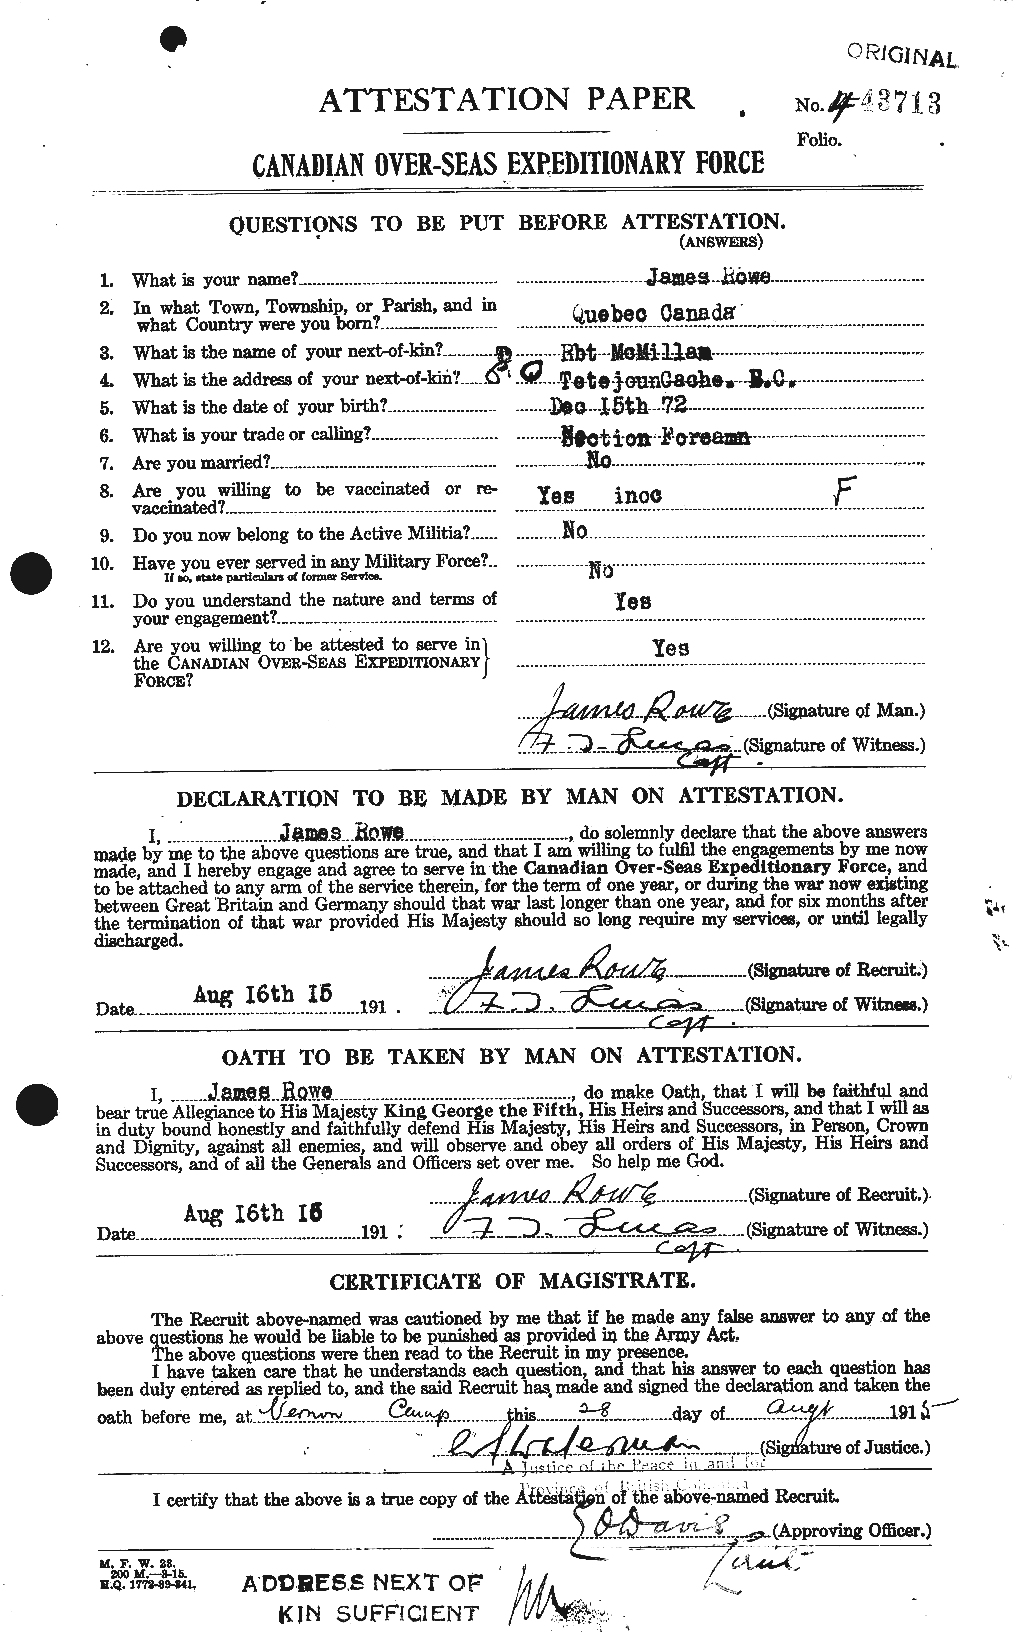 Personnel Records of the First World War - CEF 615906a